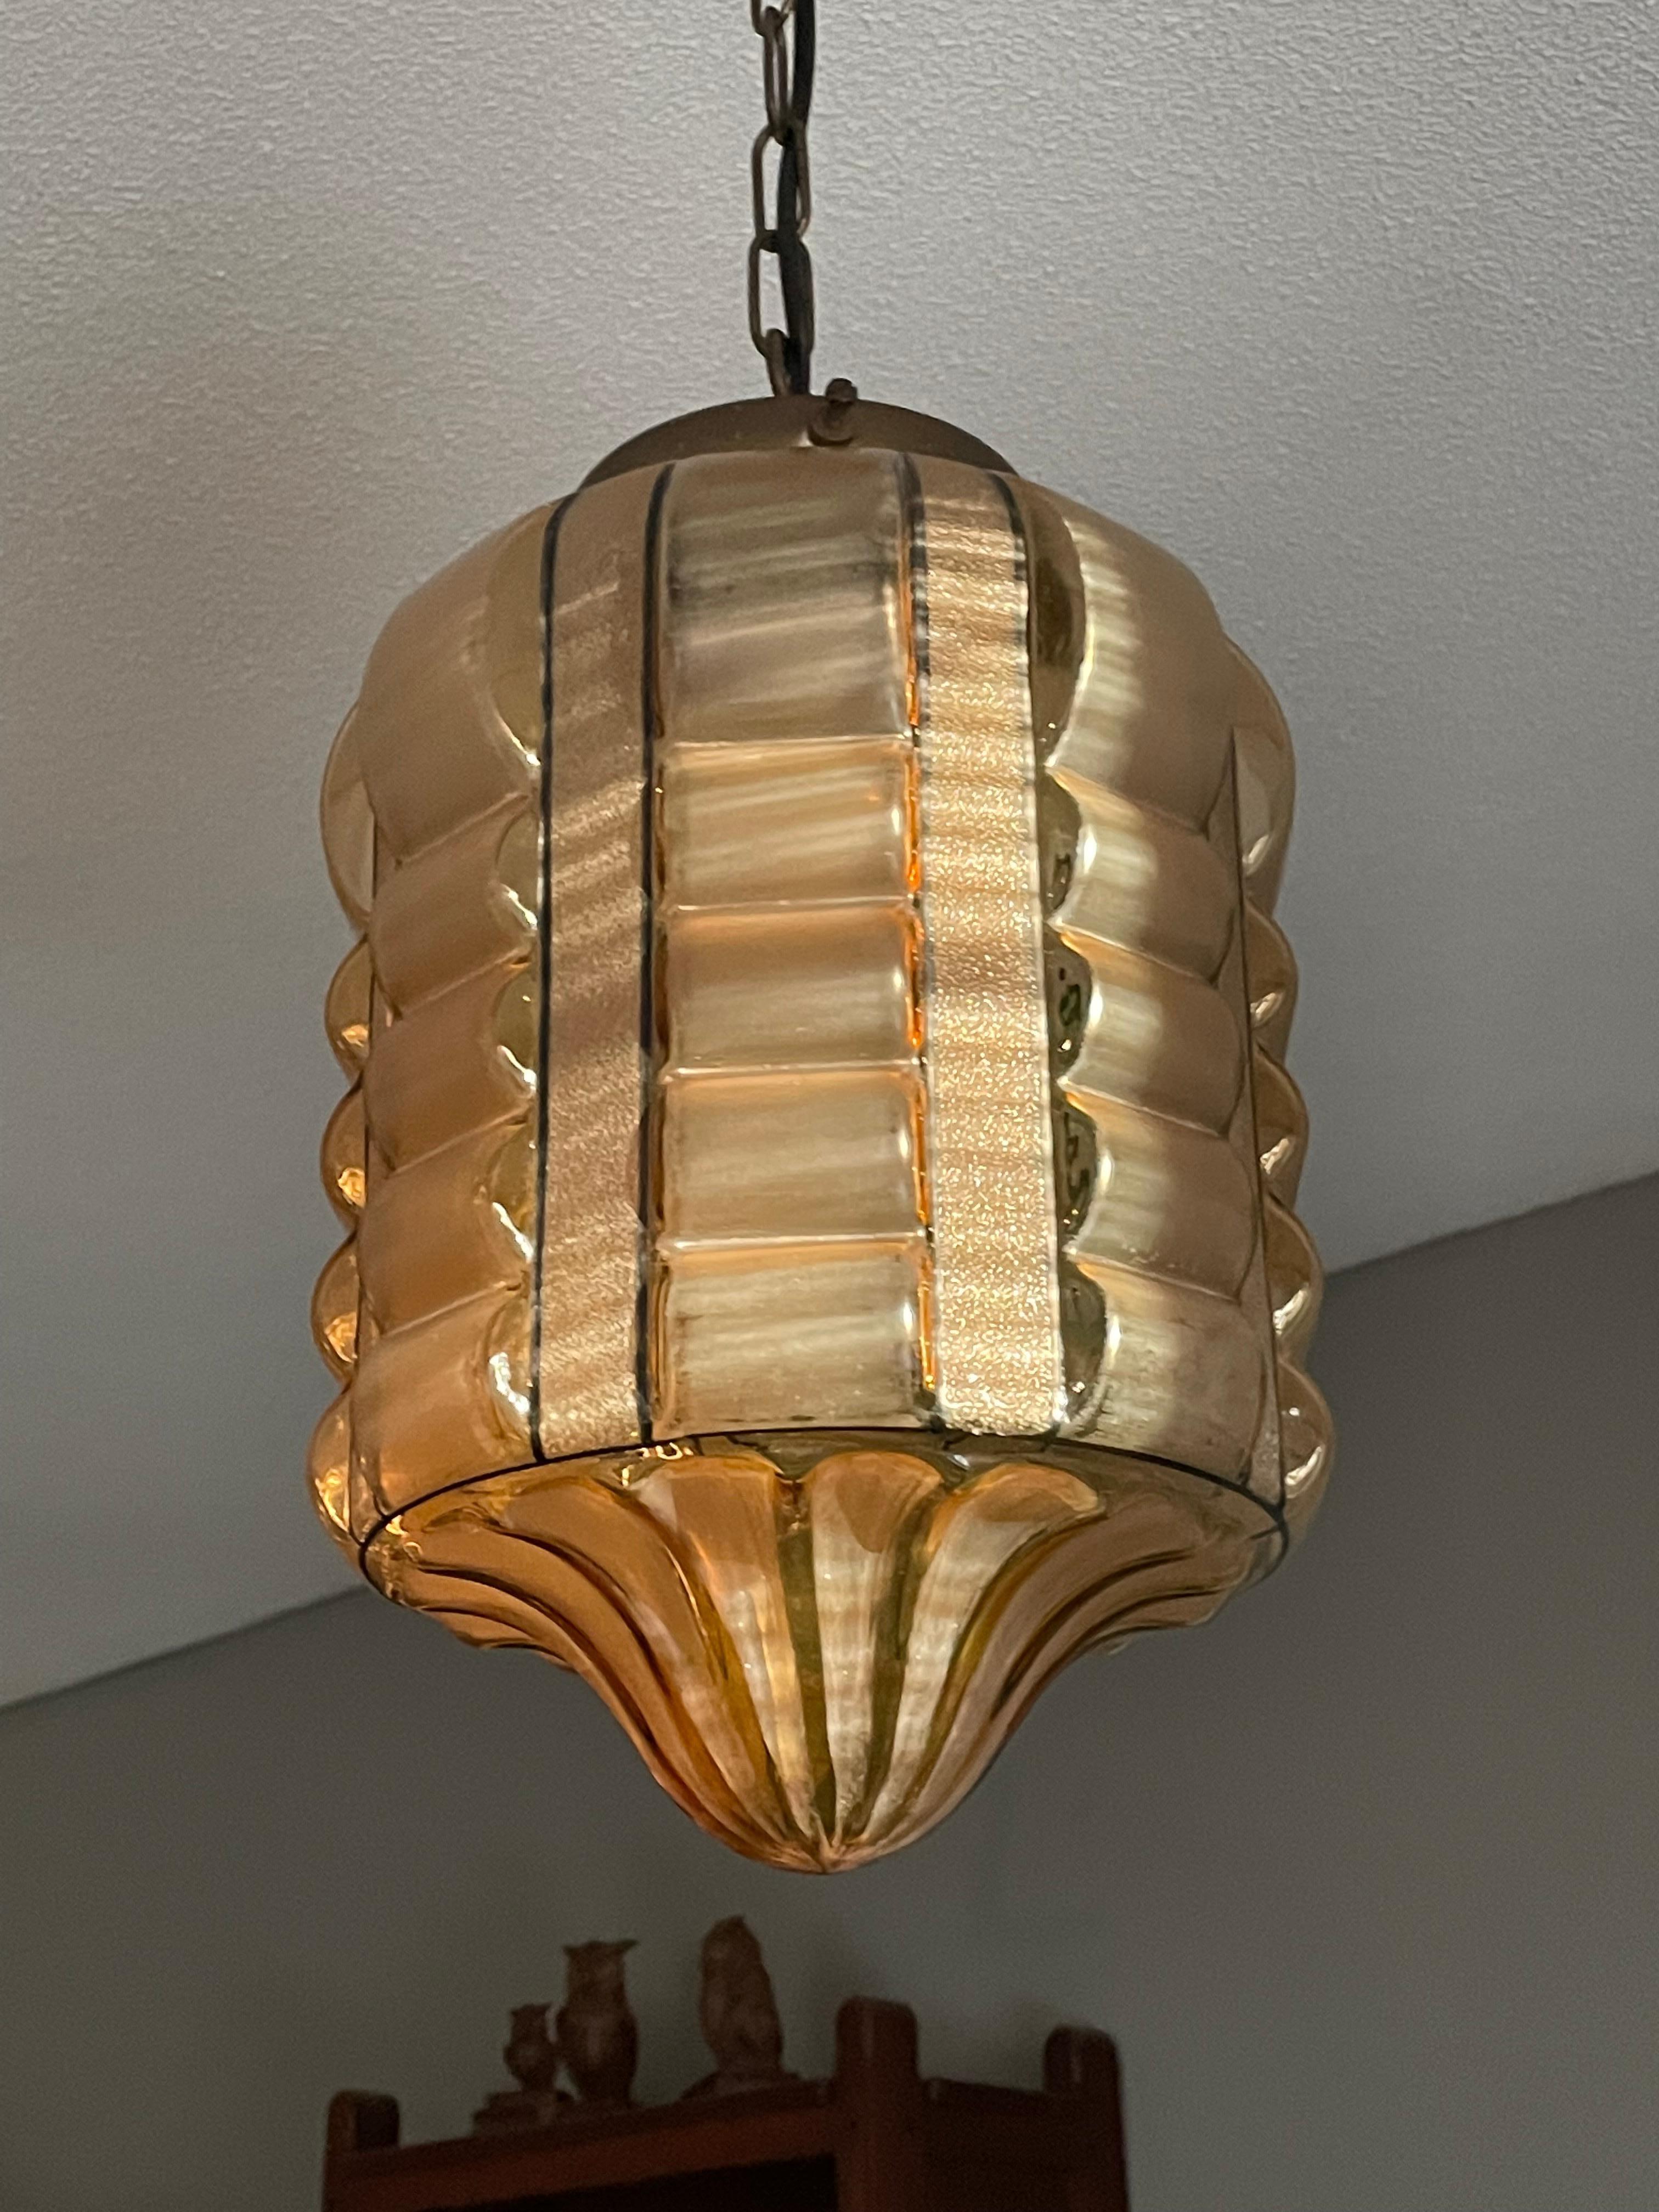 Rare Rounded Geometrical Design Art Deco Pendant Light with Brass Chain & Canopy 2